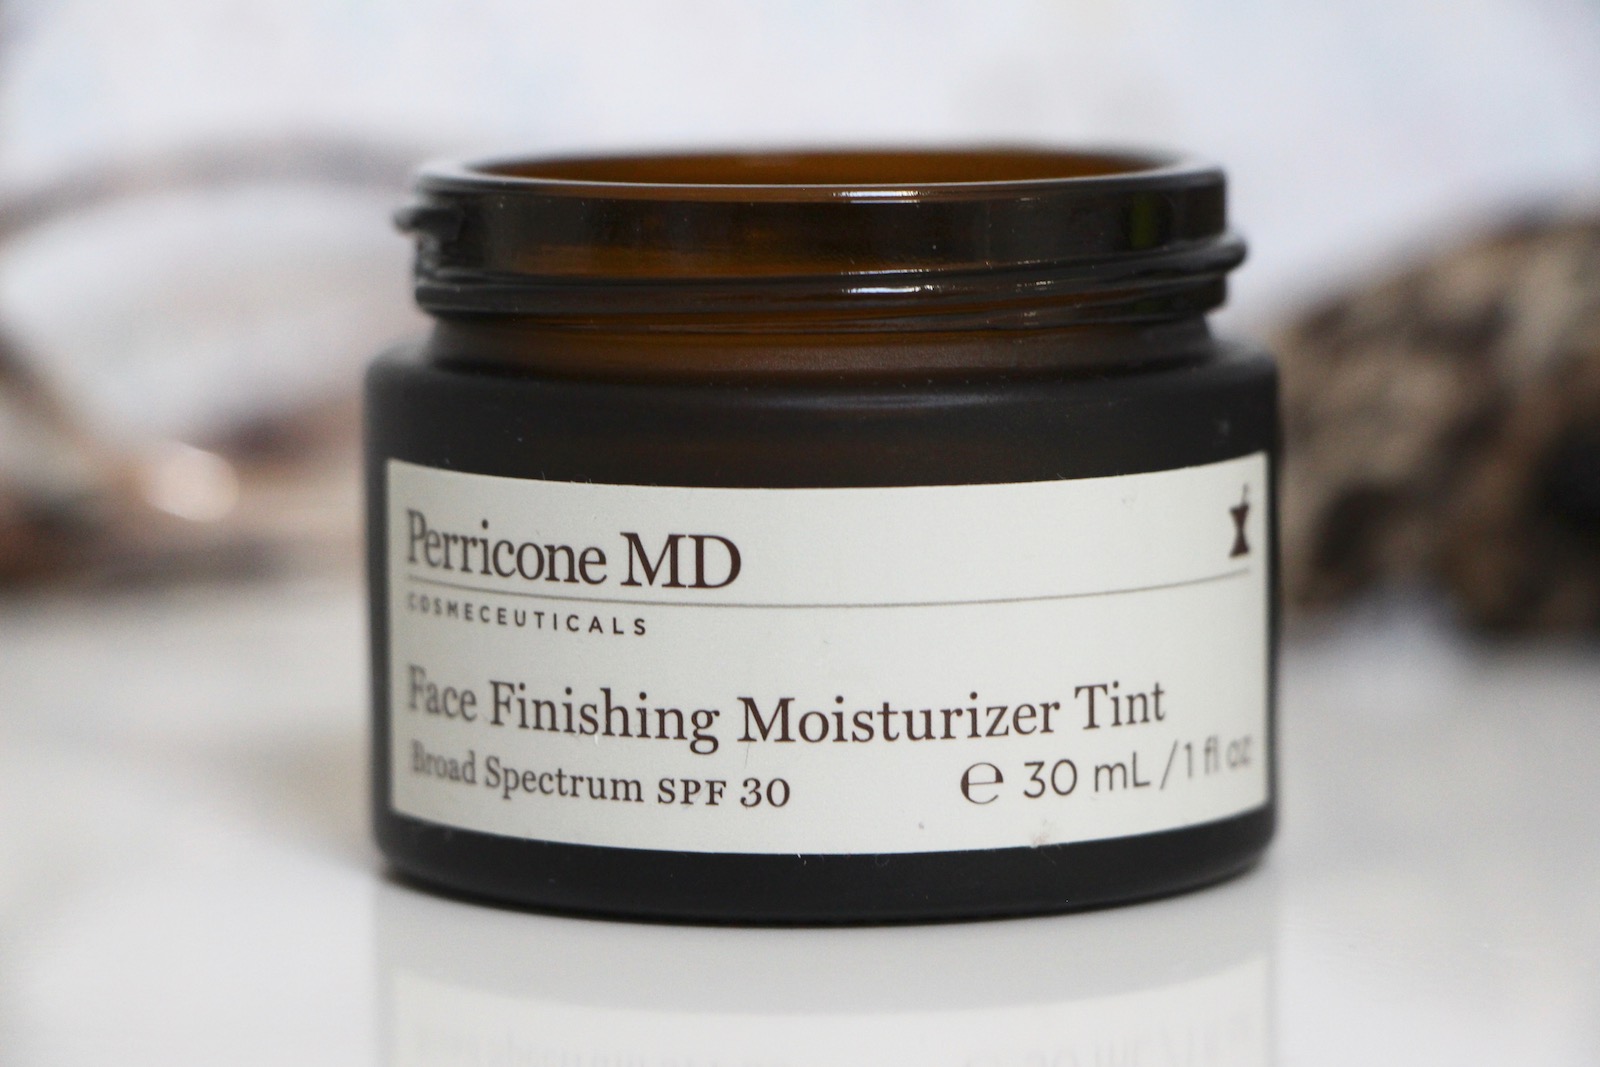 Perricone MD Face Finishing Moisturizer Tint Review